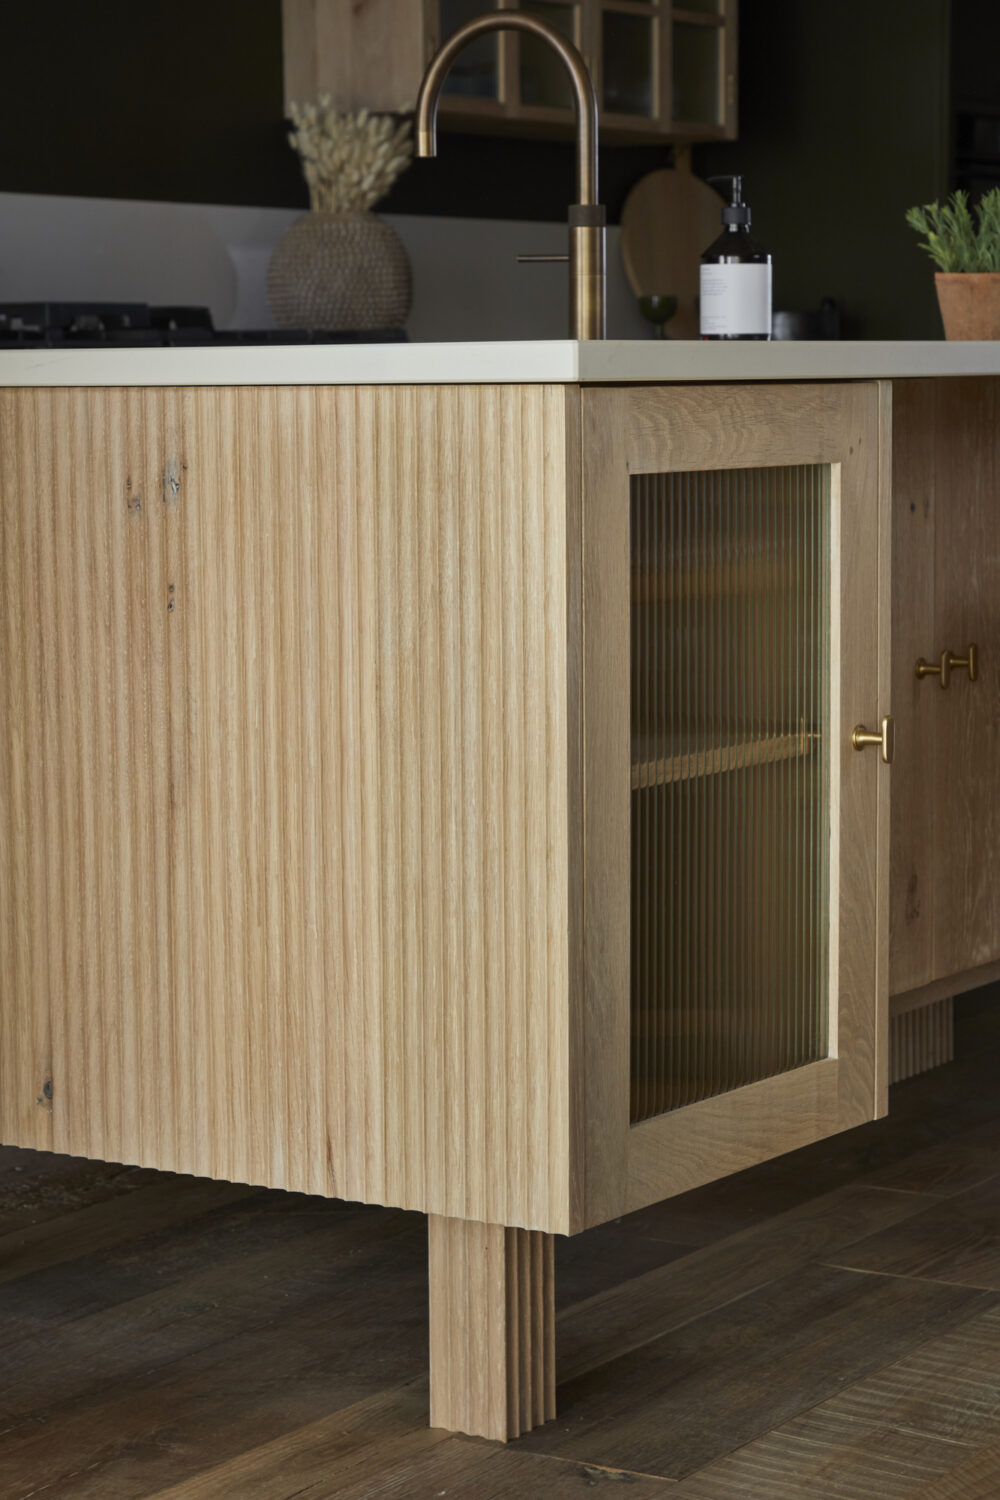 collaboration display kitchen located in London: fluted details on the floating island